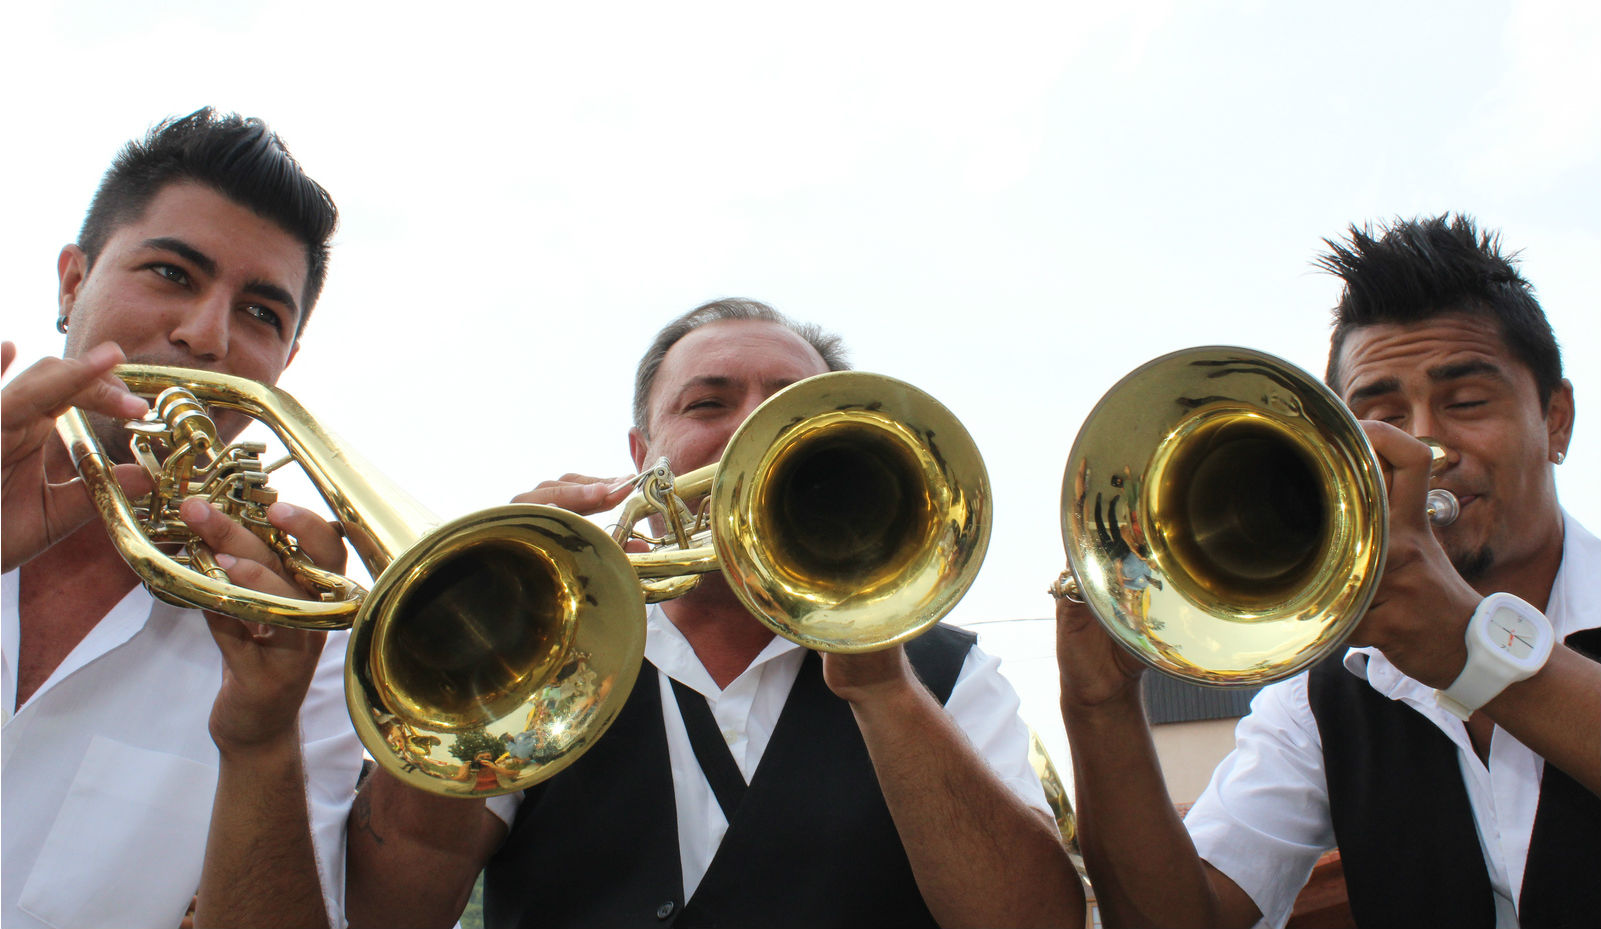 Guča, a festival of brass music and great fun 